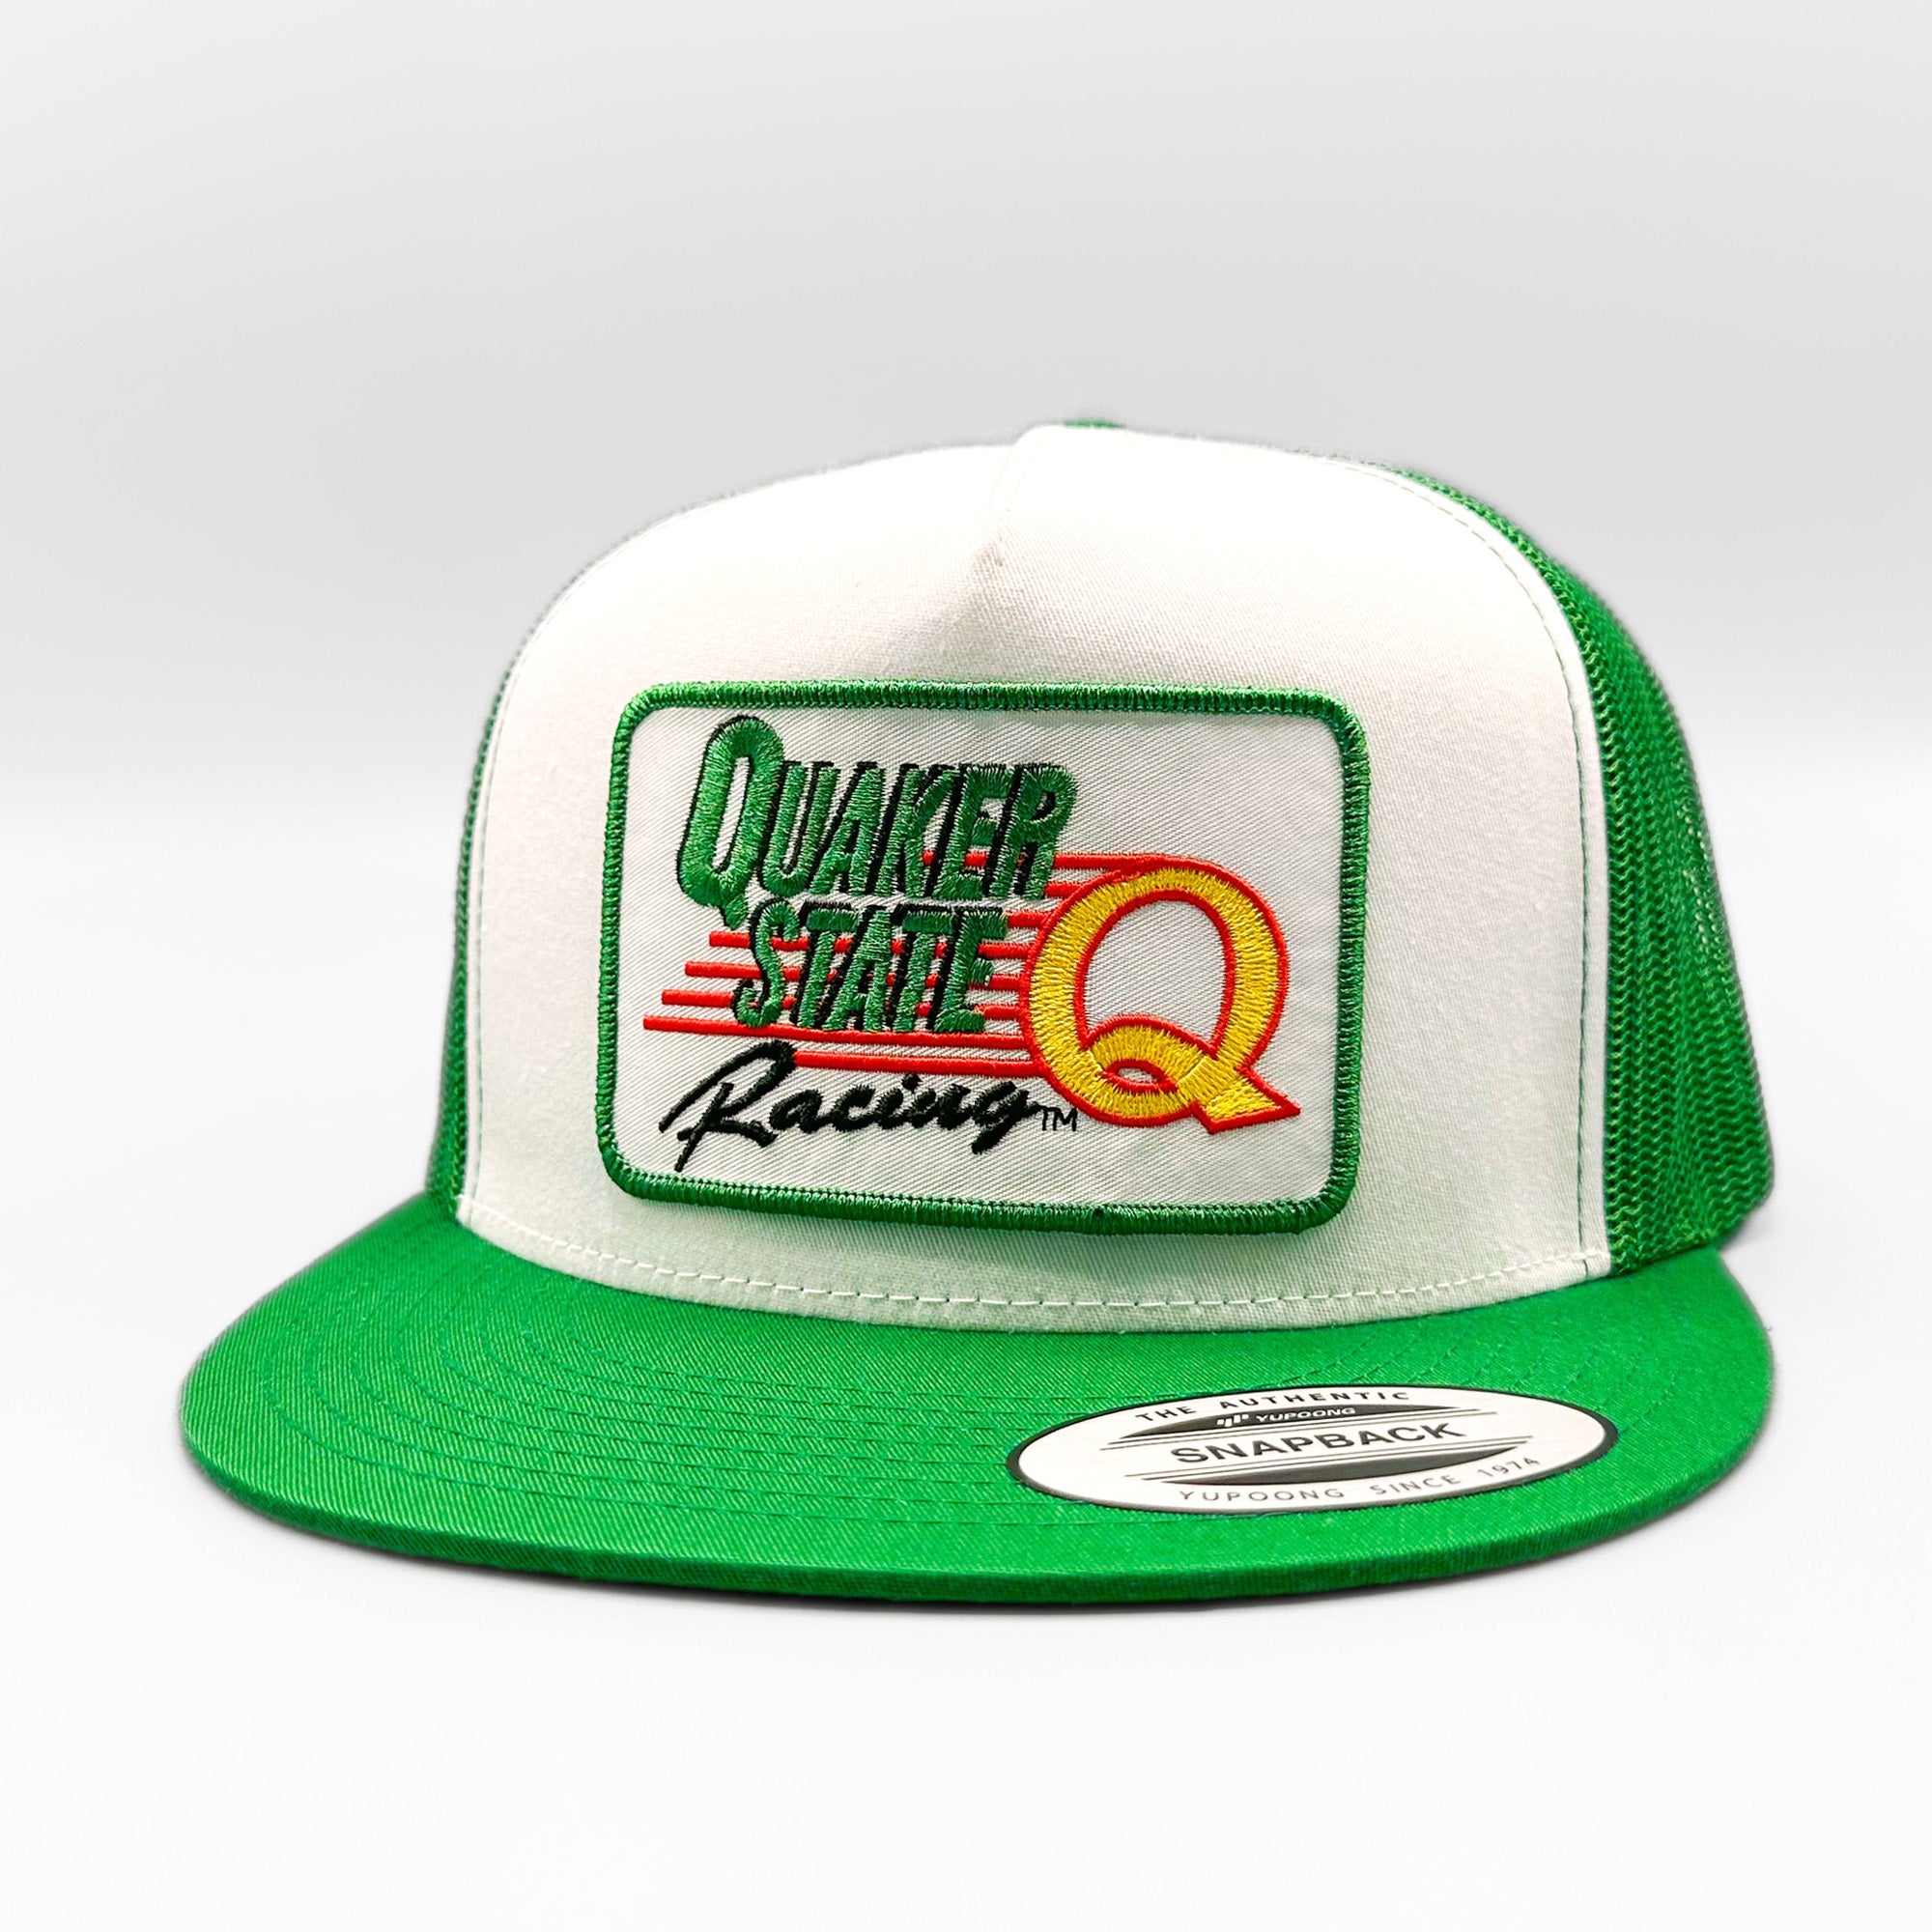 Quaker State Racing Hat Retro Racing Patch on Yupoong 6006 Trucker